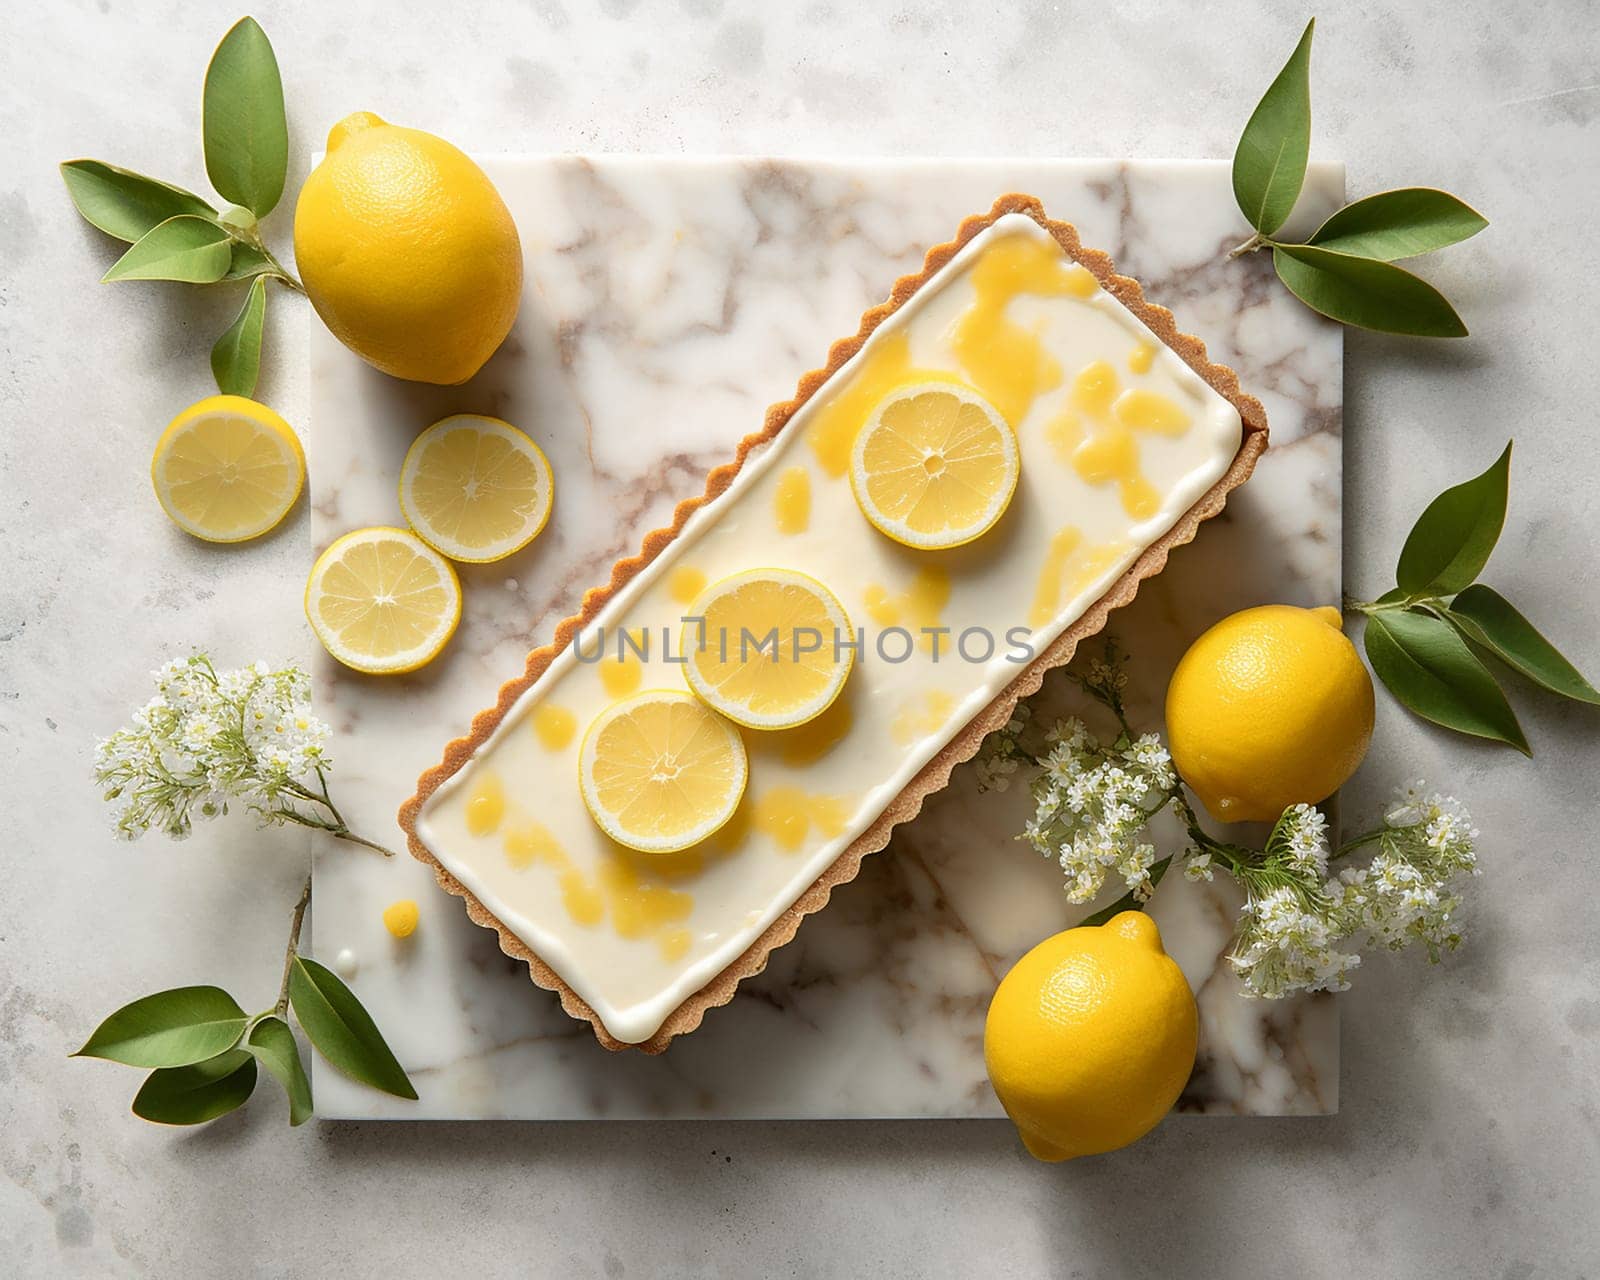 Lemon tart on marble surface with fresh lemons and flowers. by Hype2art